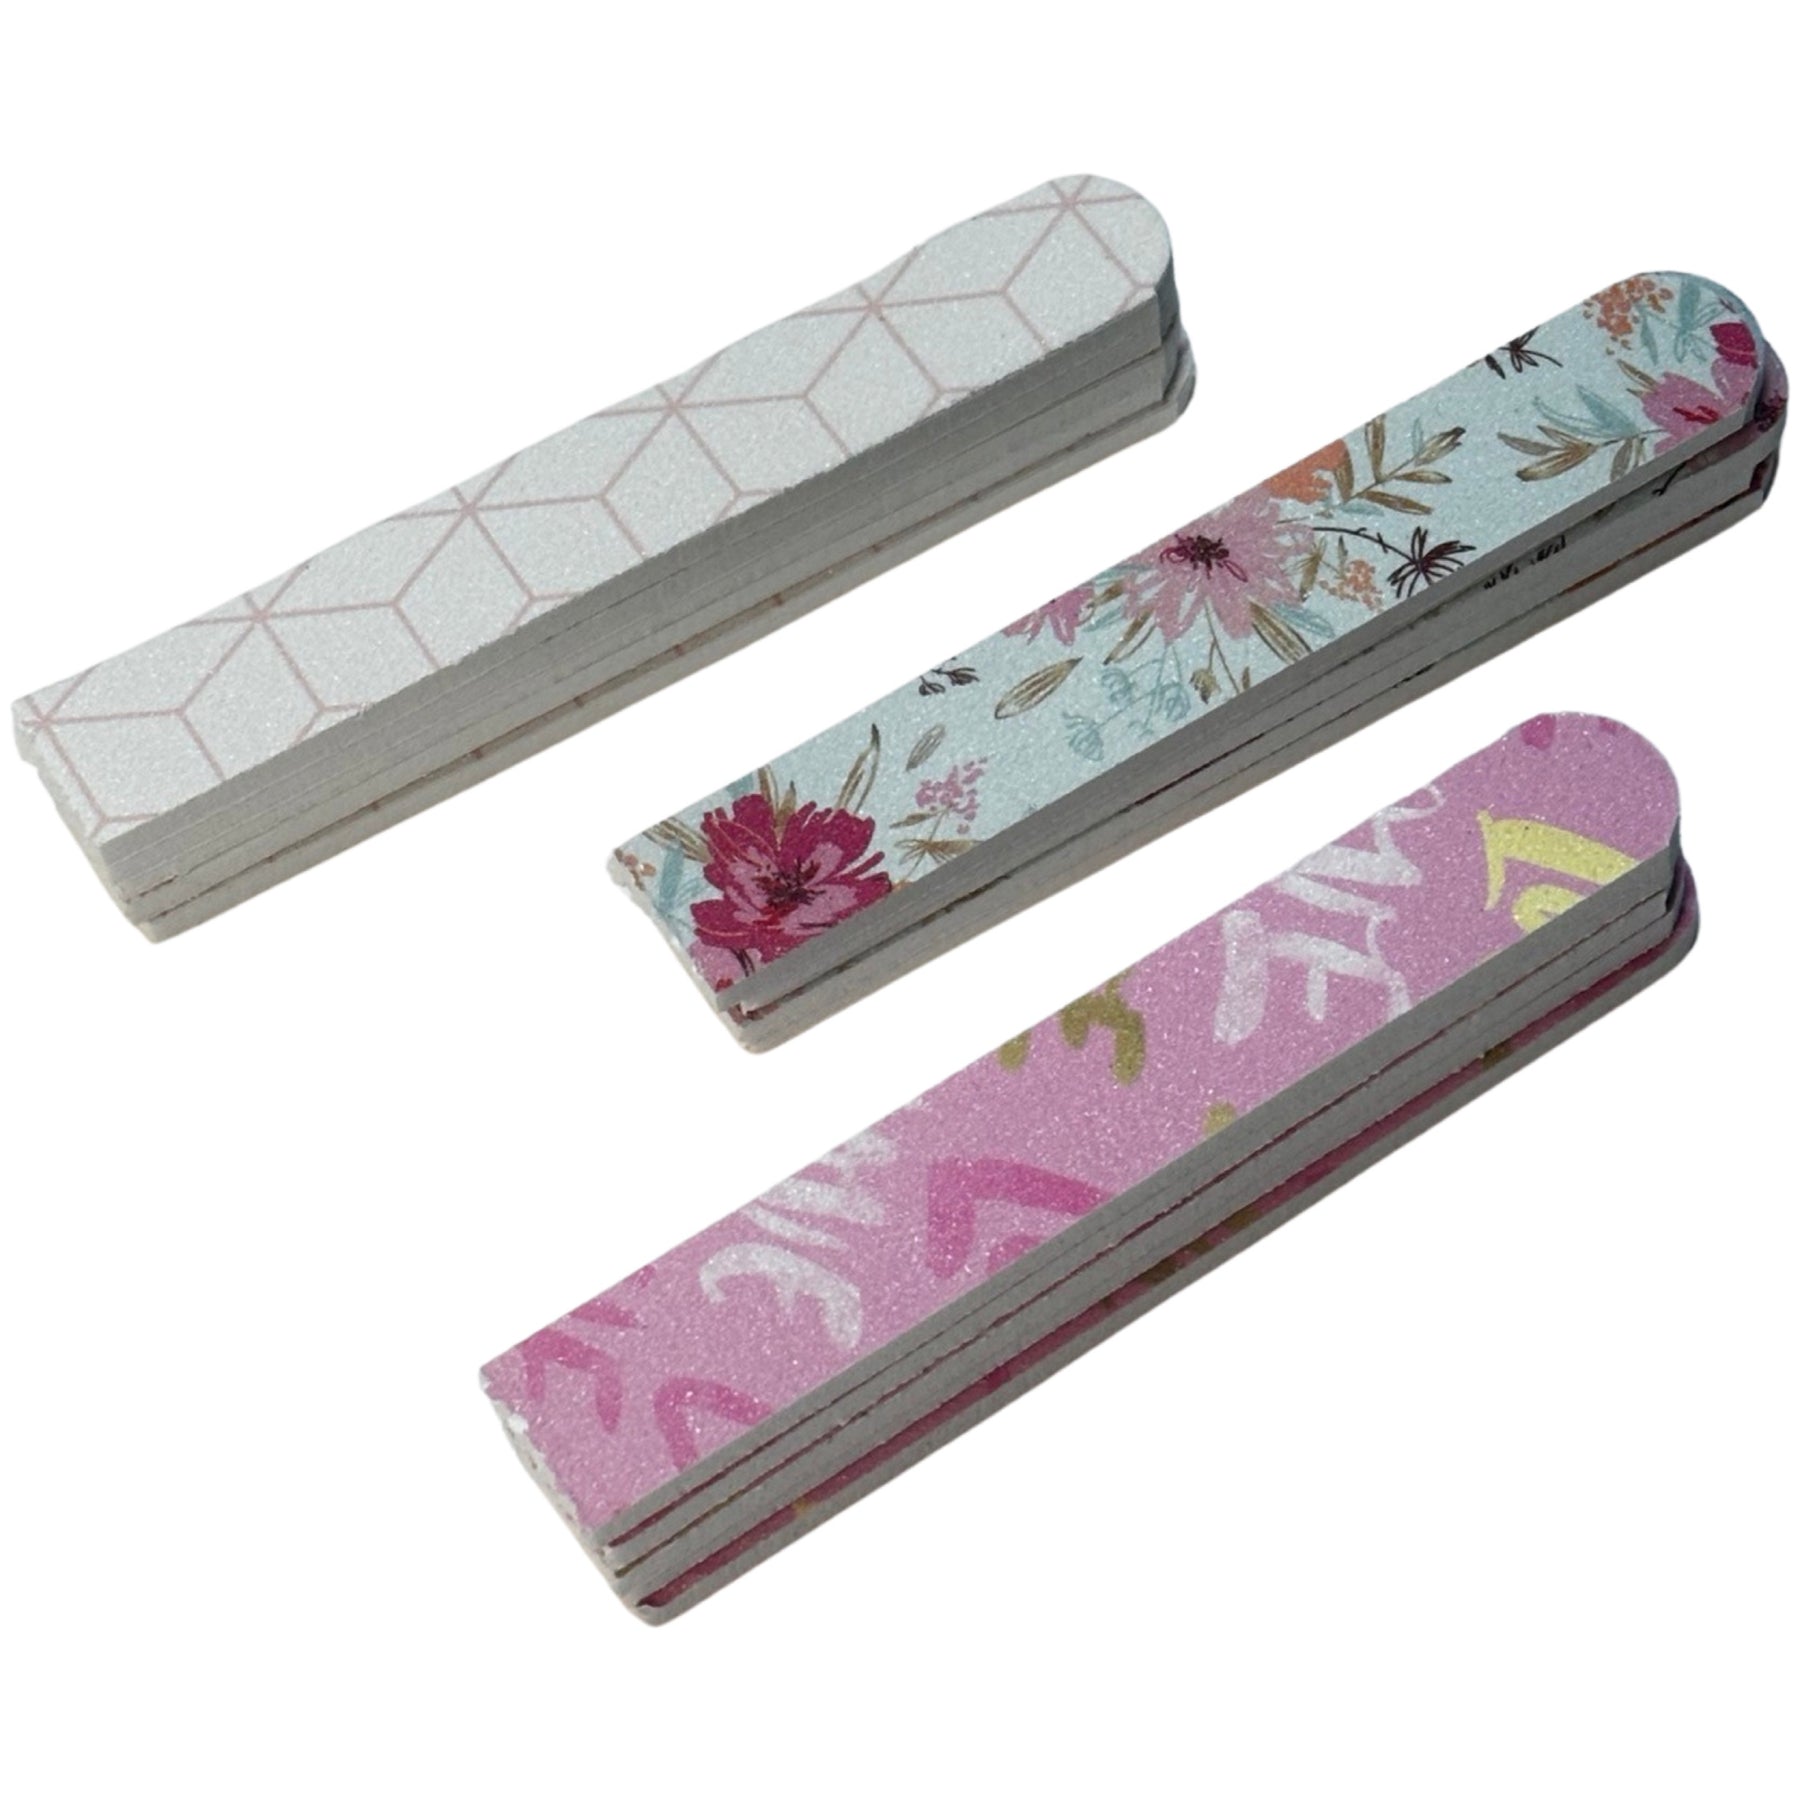 15pk of 4.25" Nail File Emery Boards - Always Have One on Hand